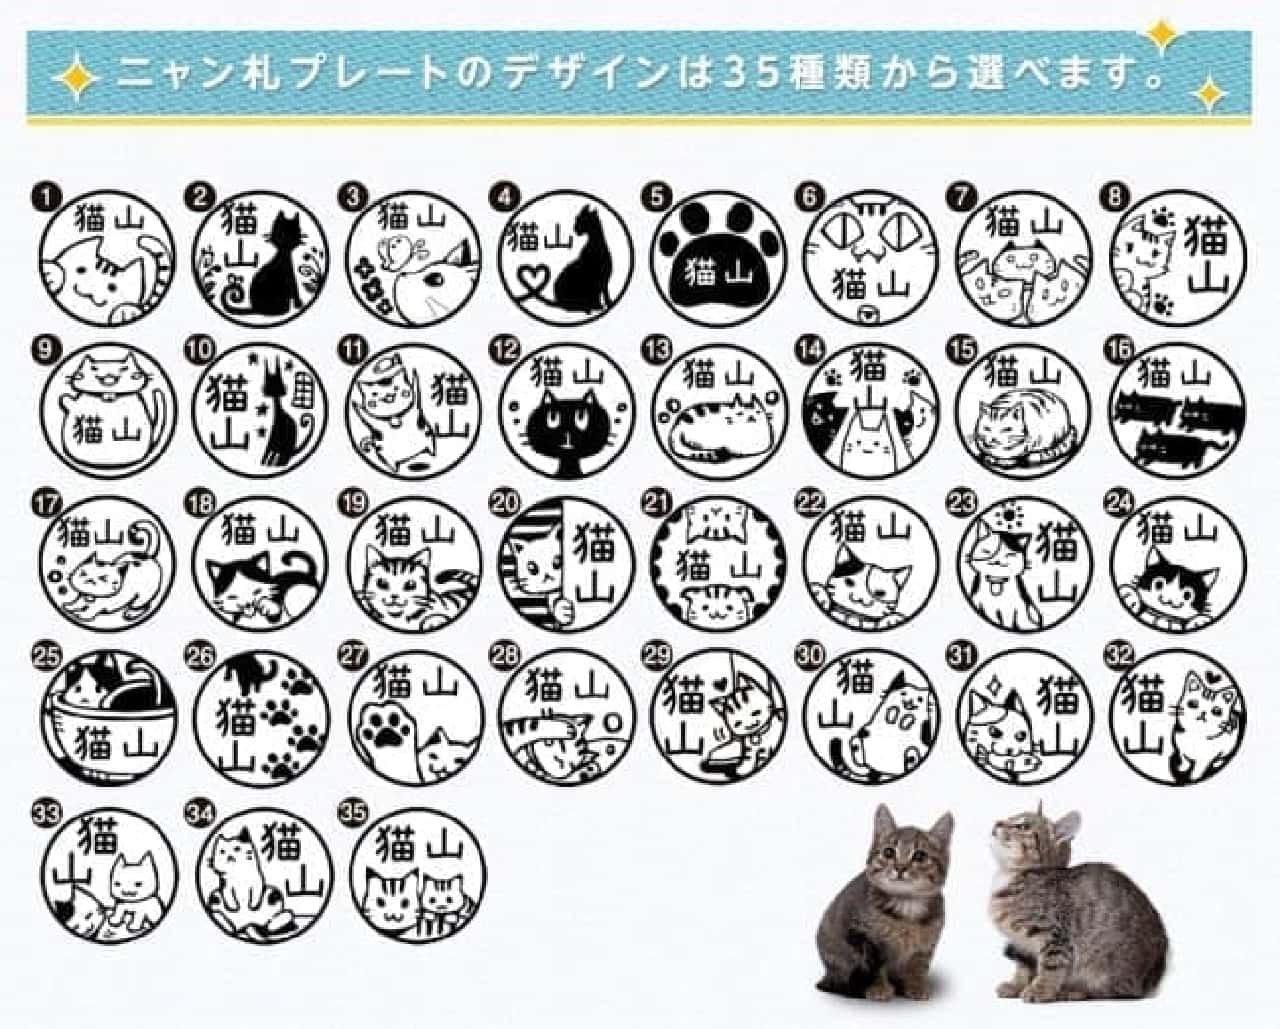 "Nyan bill plate" for apartments and condominiums on the nameplate "Nyan bill" with illustrations of cats